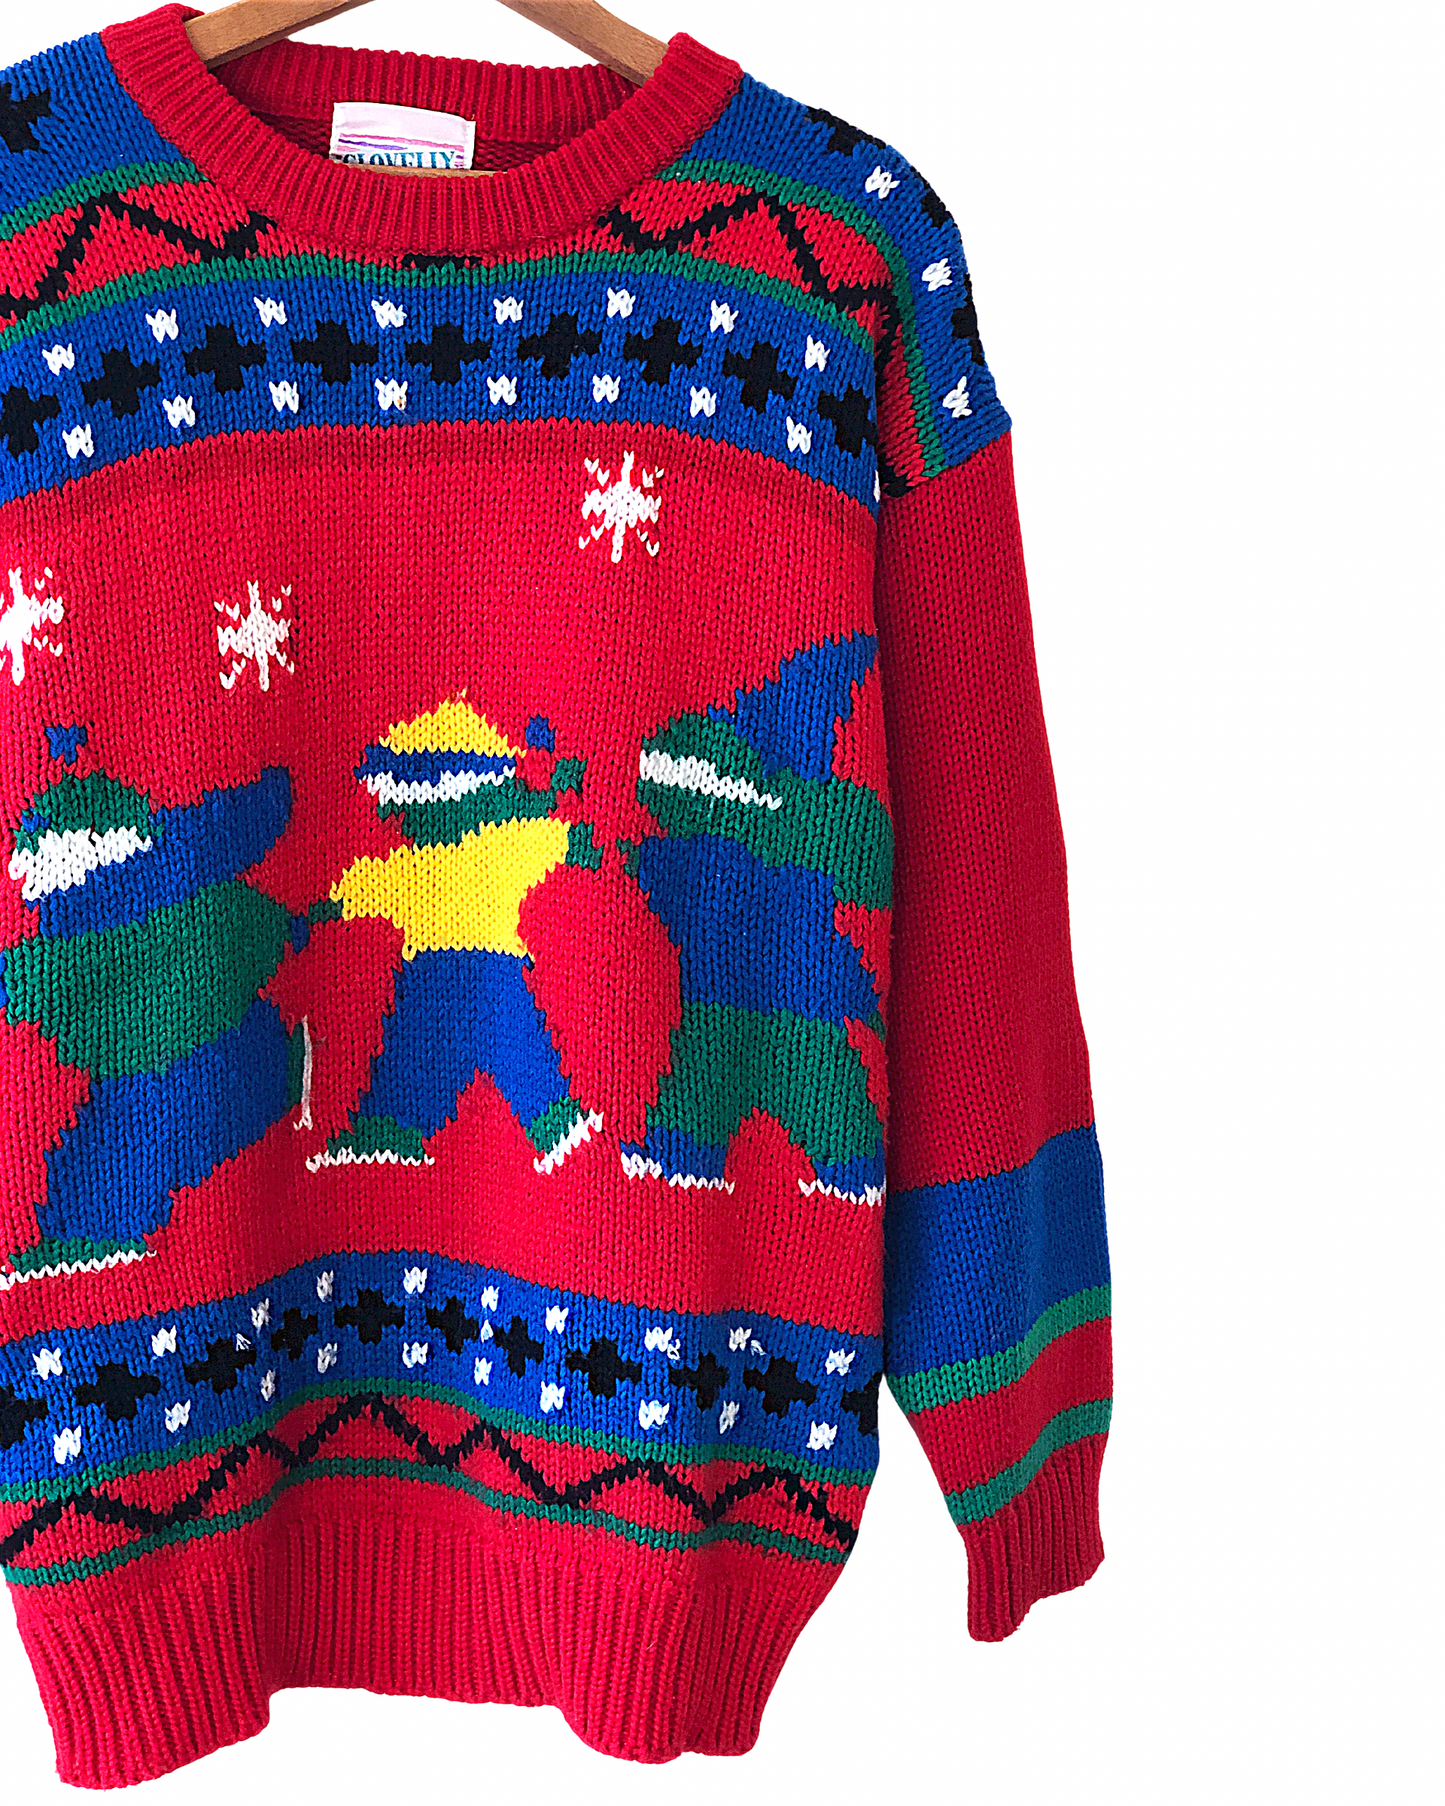 80's Ice Skaters Cute Fair Isle Chunky Knit Ugly Holiday Sweater Size Large